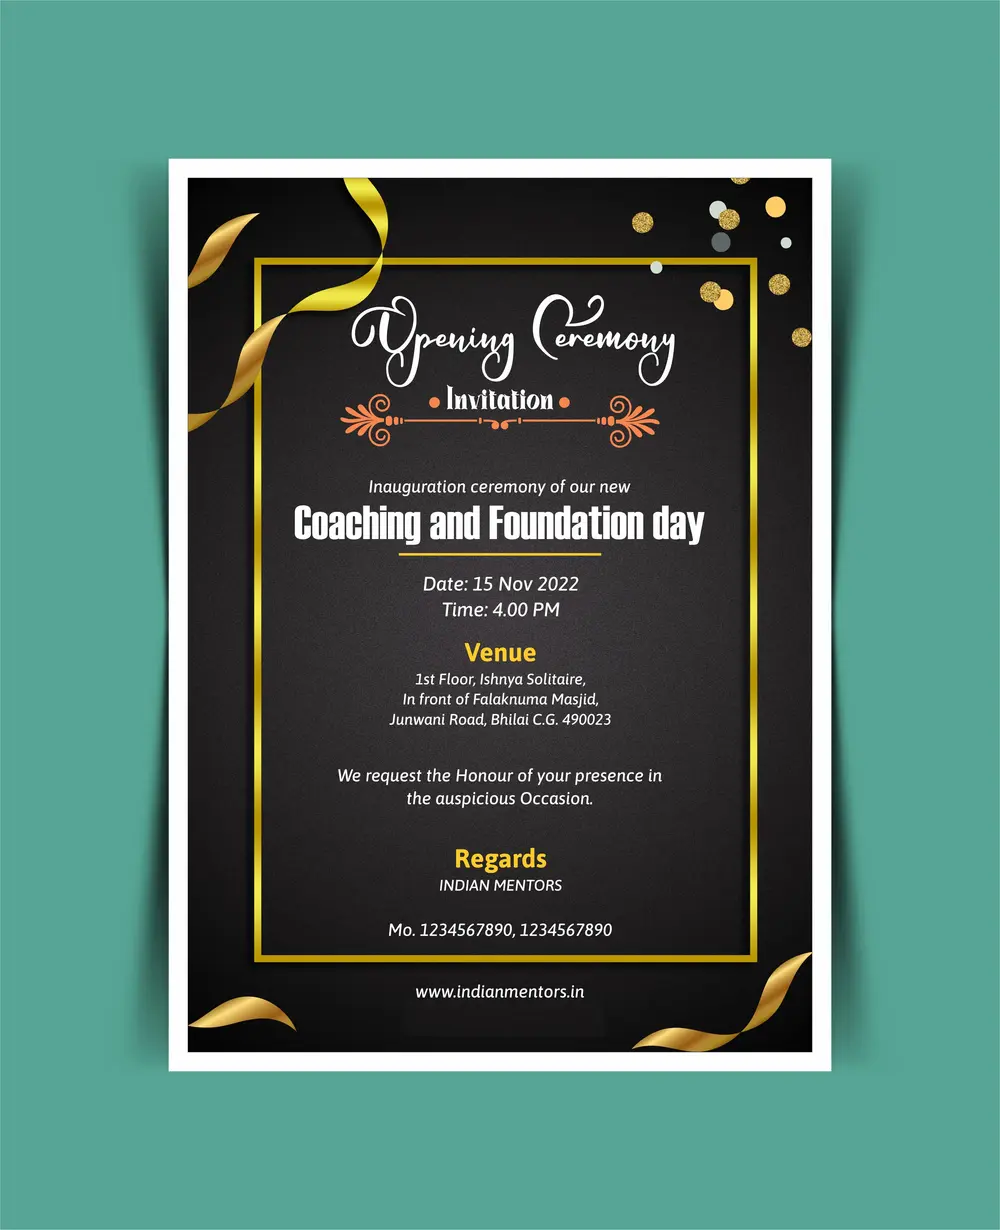 Opening ceremony invitation card template cdr and psd file download-min